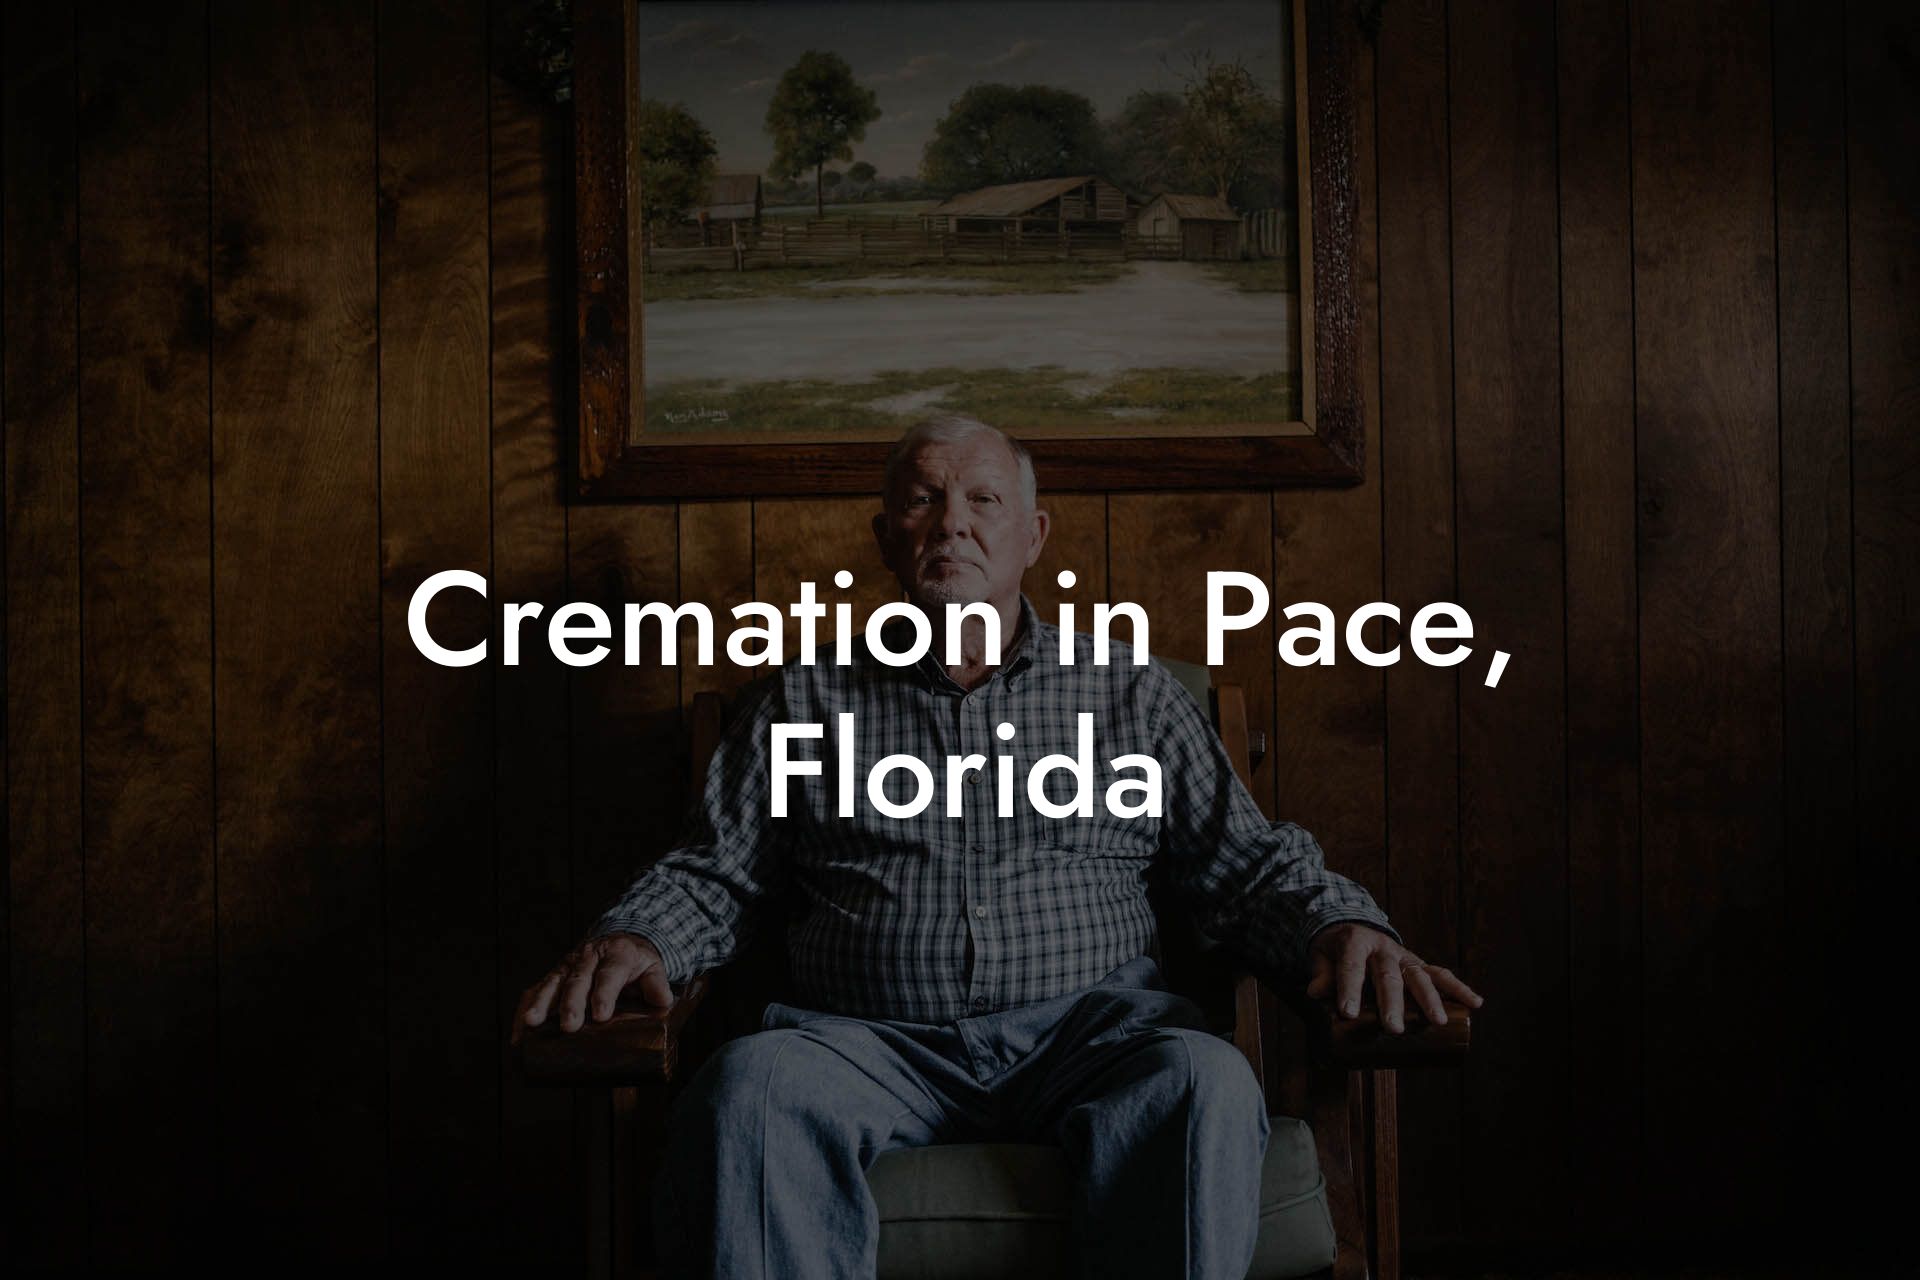 Cremation in Pace, Florida